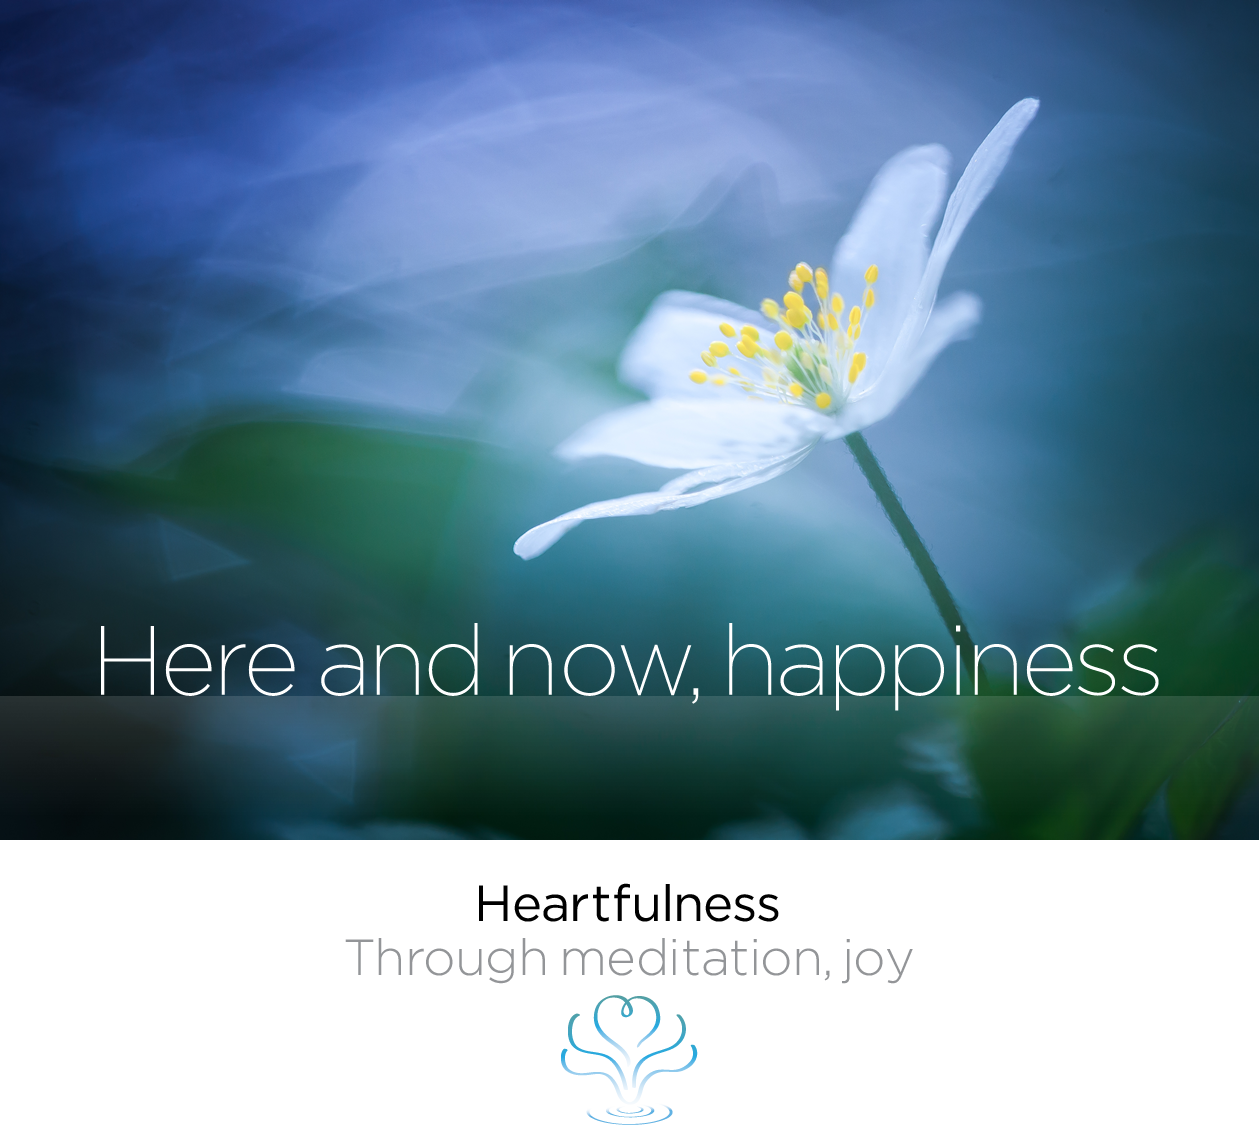 Heartfulness Here and now, happiness